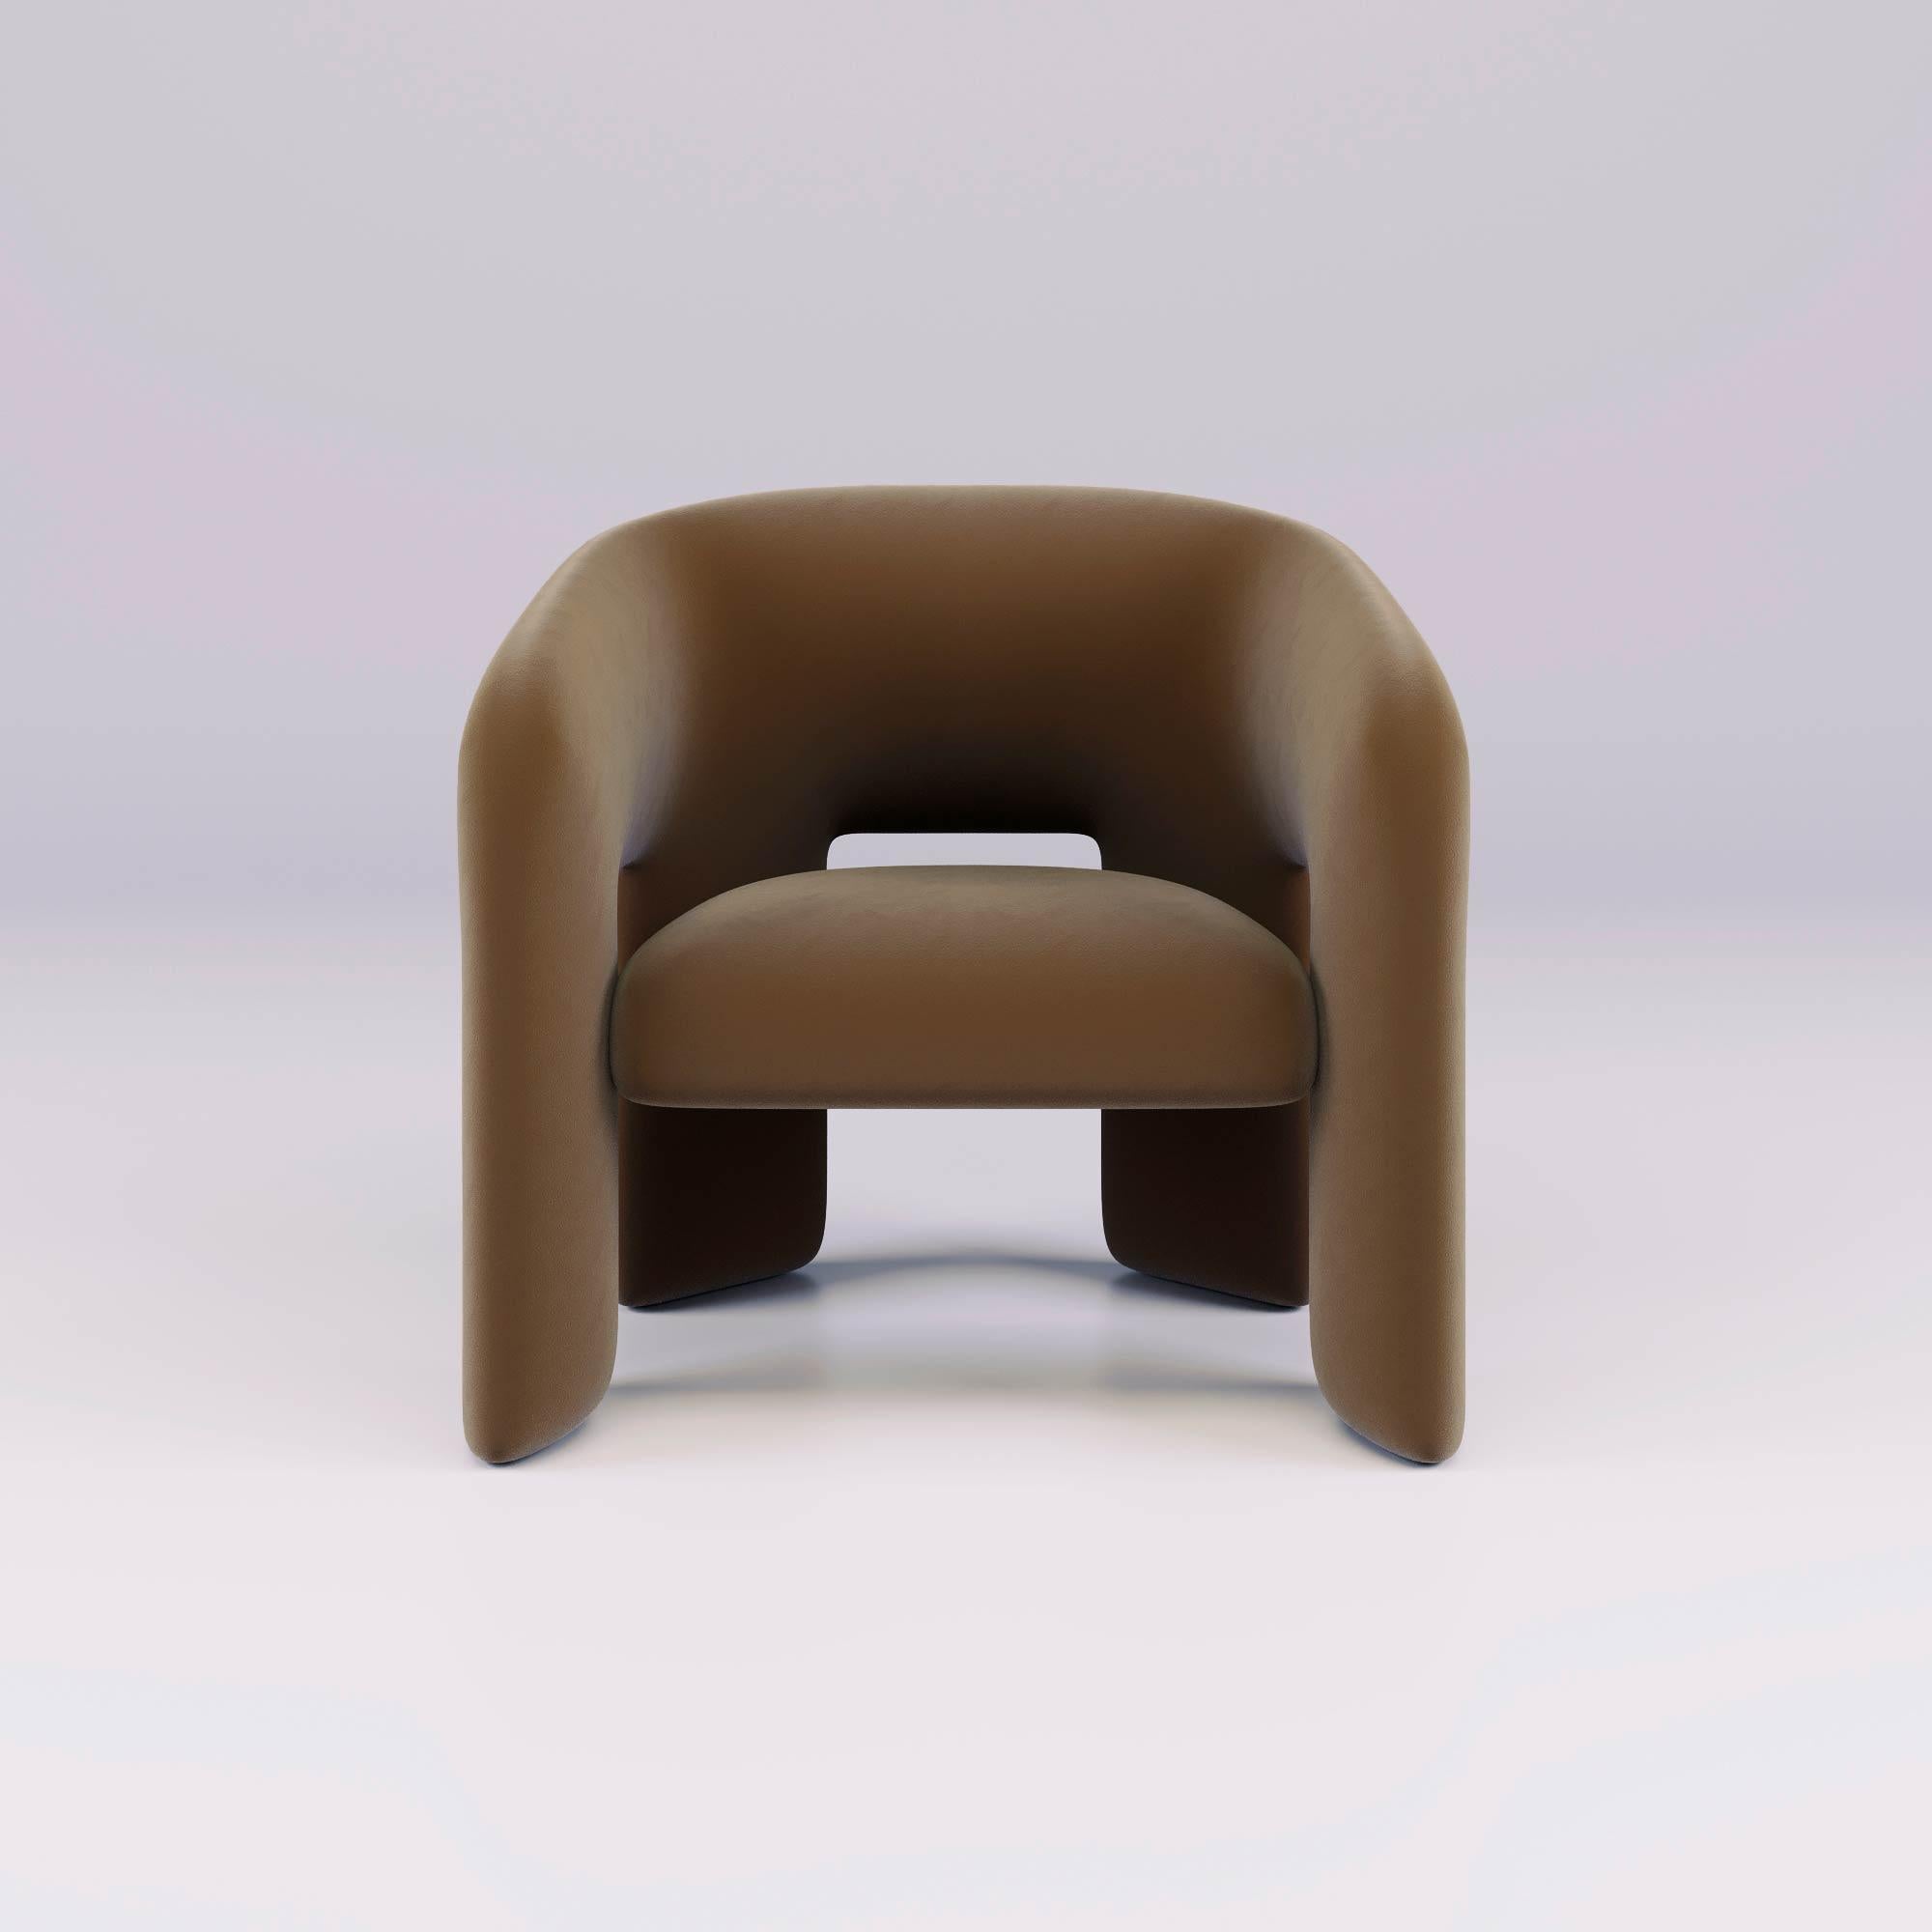 Celebrating the art of relaxed sophistication, the Bold Armchair is a statement piece that embodies the spirit of modern design. The skillful use of high-quality materials, combined with craftsmanship, gives the Bold Armchair a modern and